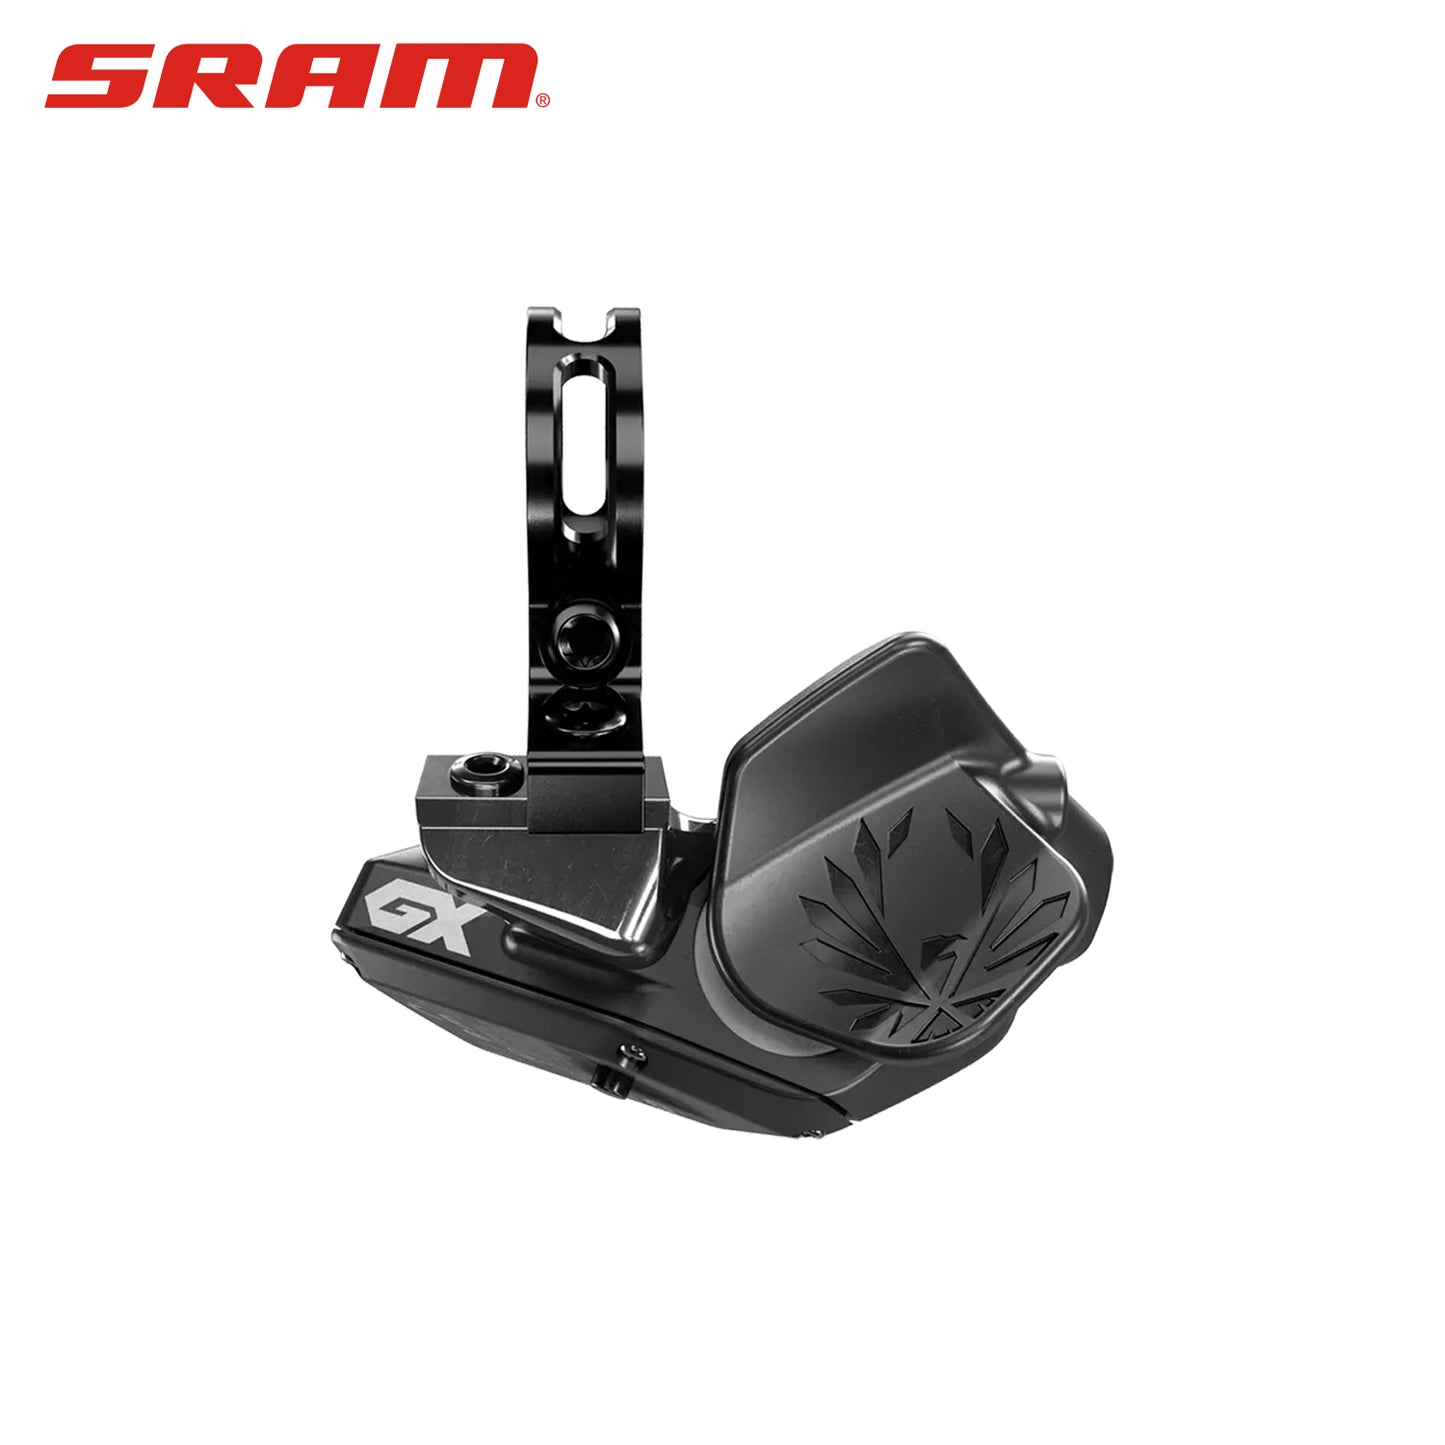 SRAM GX Eagle AXS Upgrade Kit w/ Rear Derailleur, Battery, and Controller